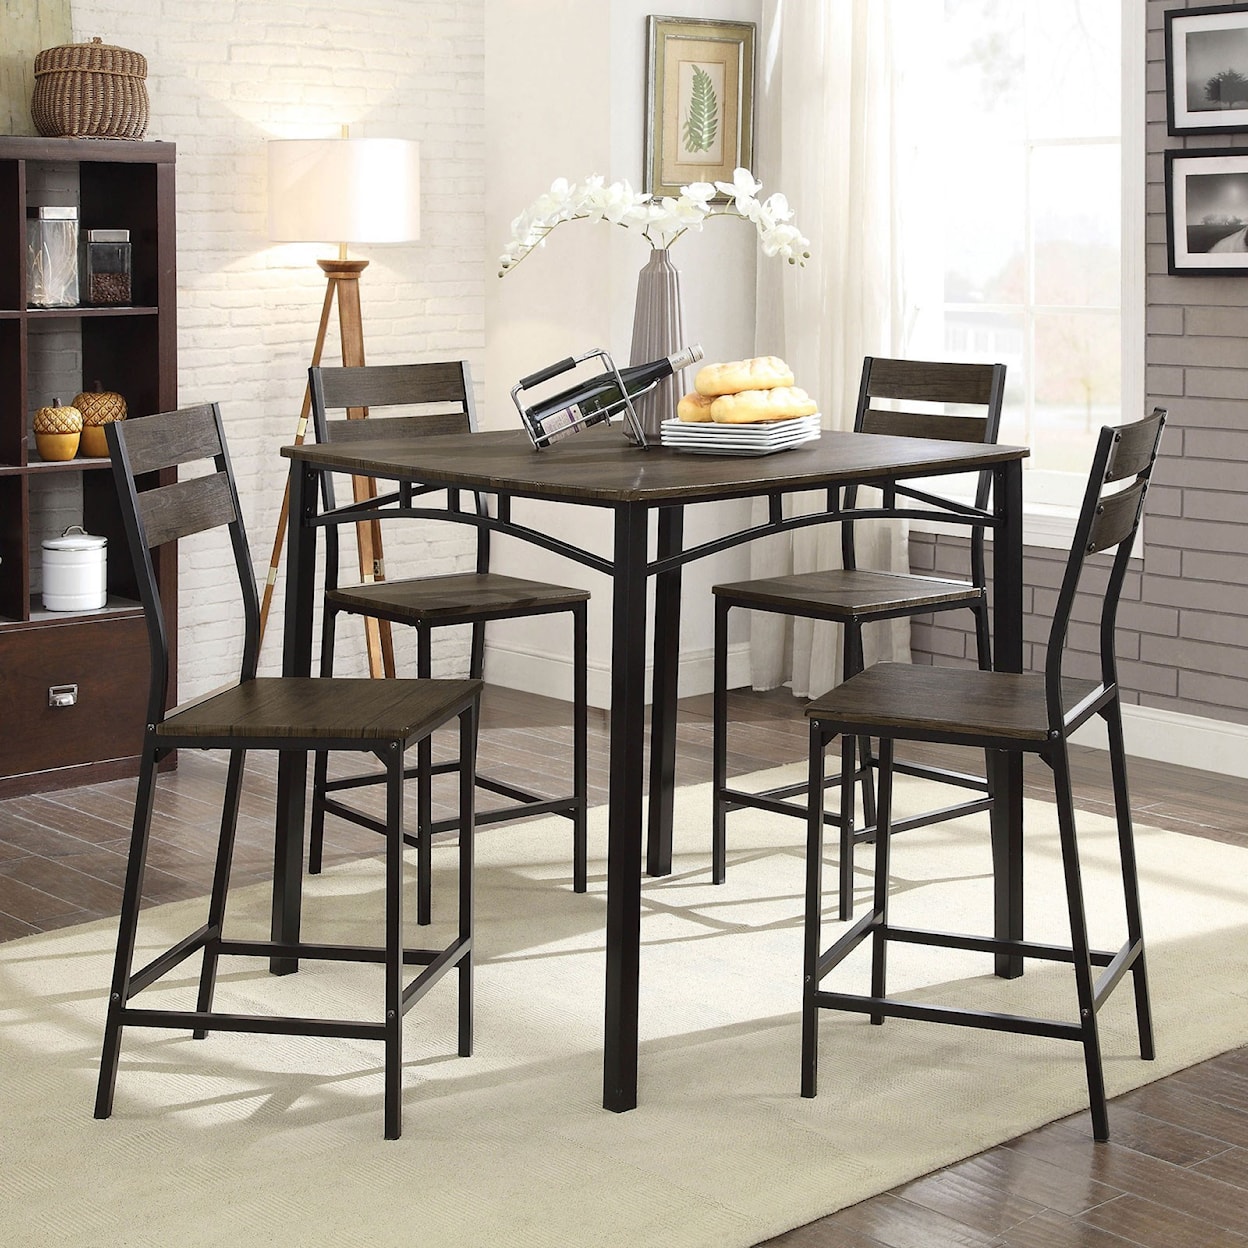 Furniture of America Westport 5-Piece Counter Height Table Set